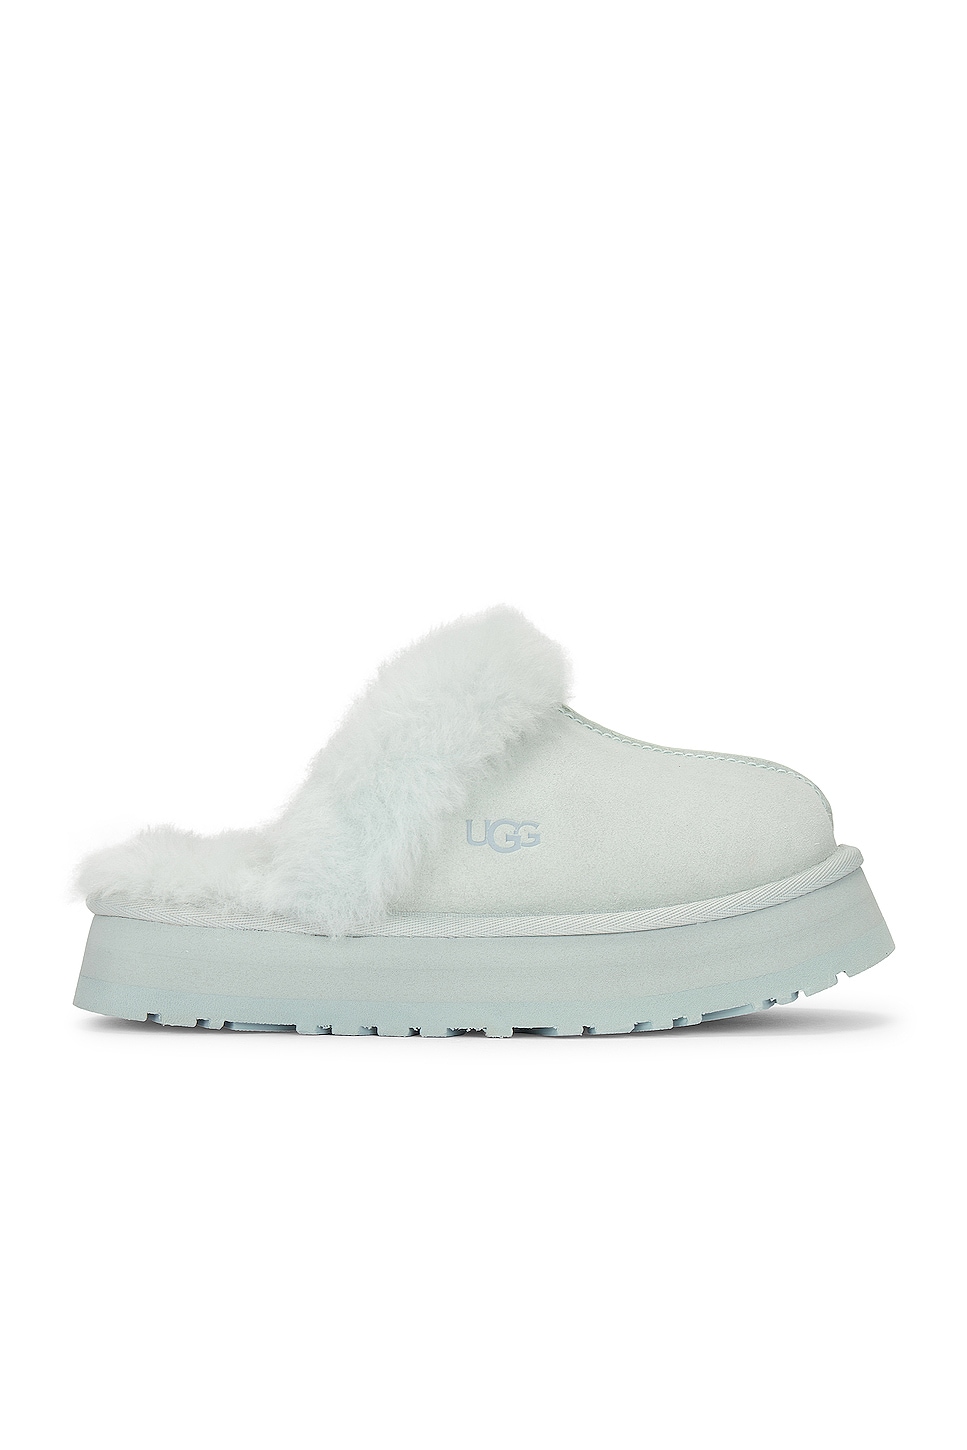 Image 1 of UGG Disquette Slipper in Goose